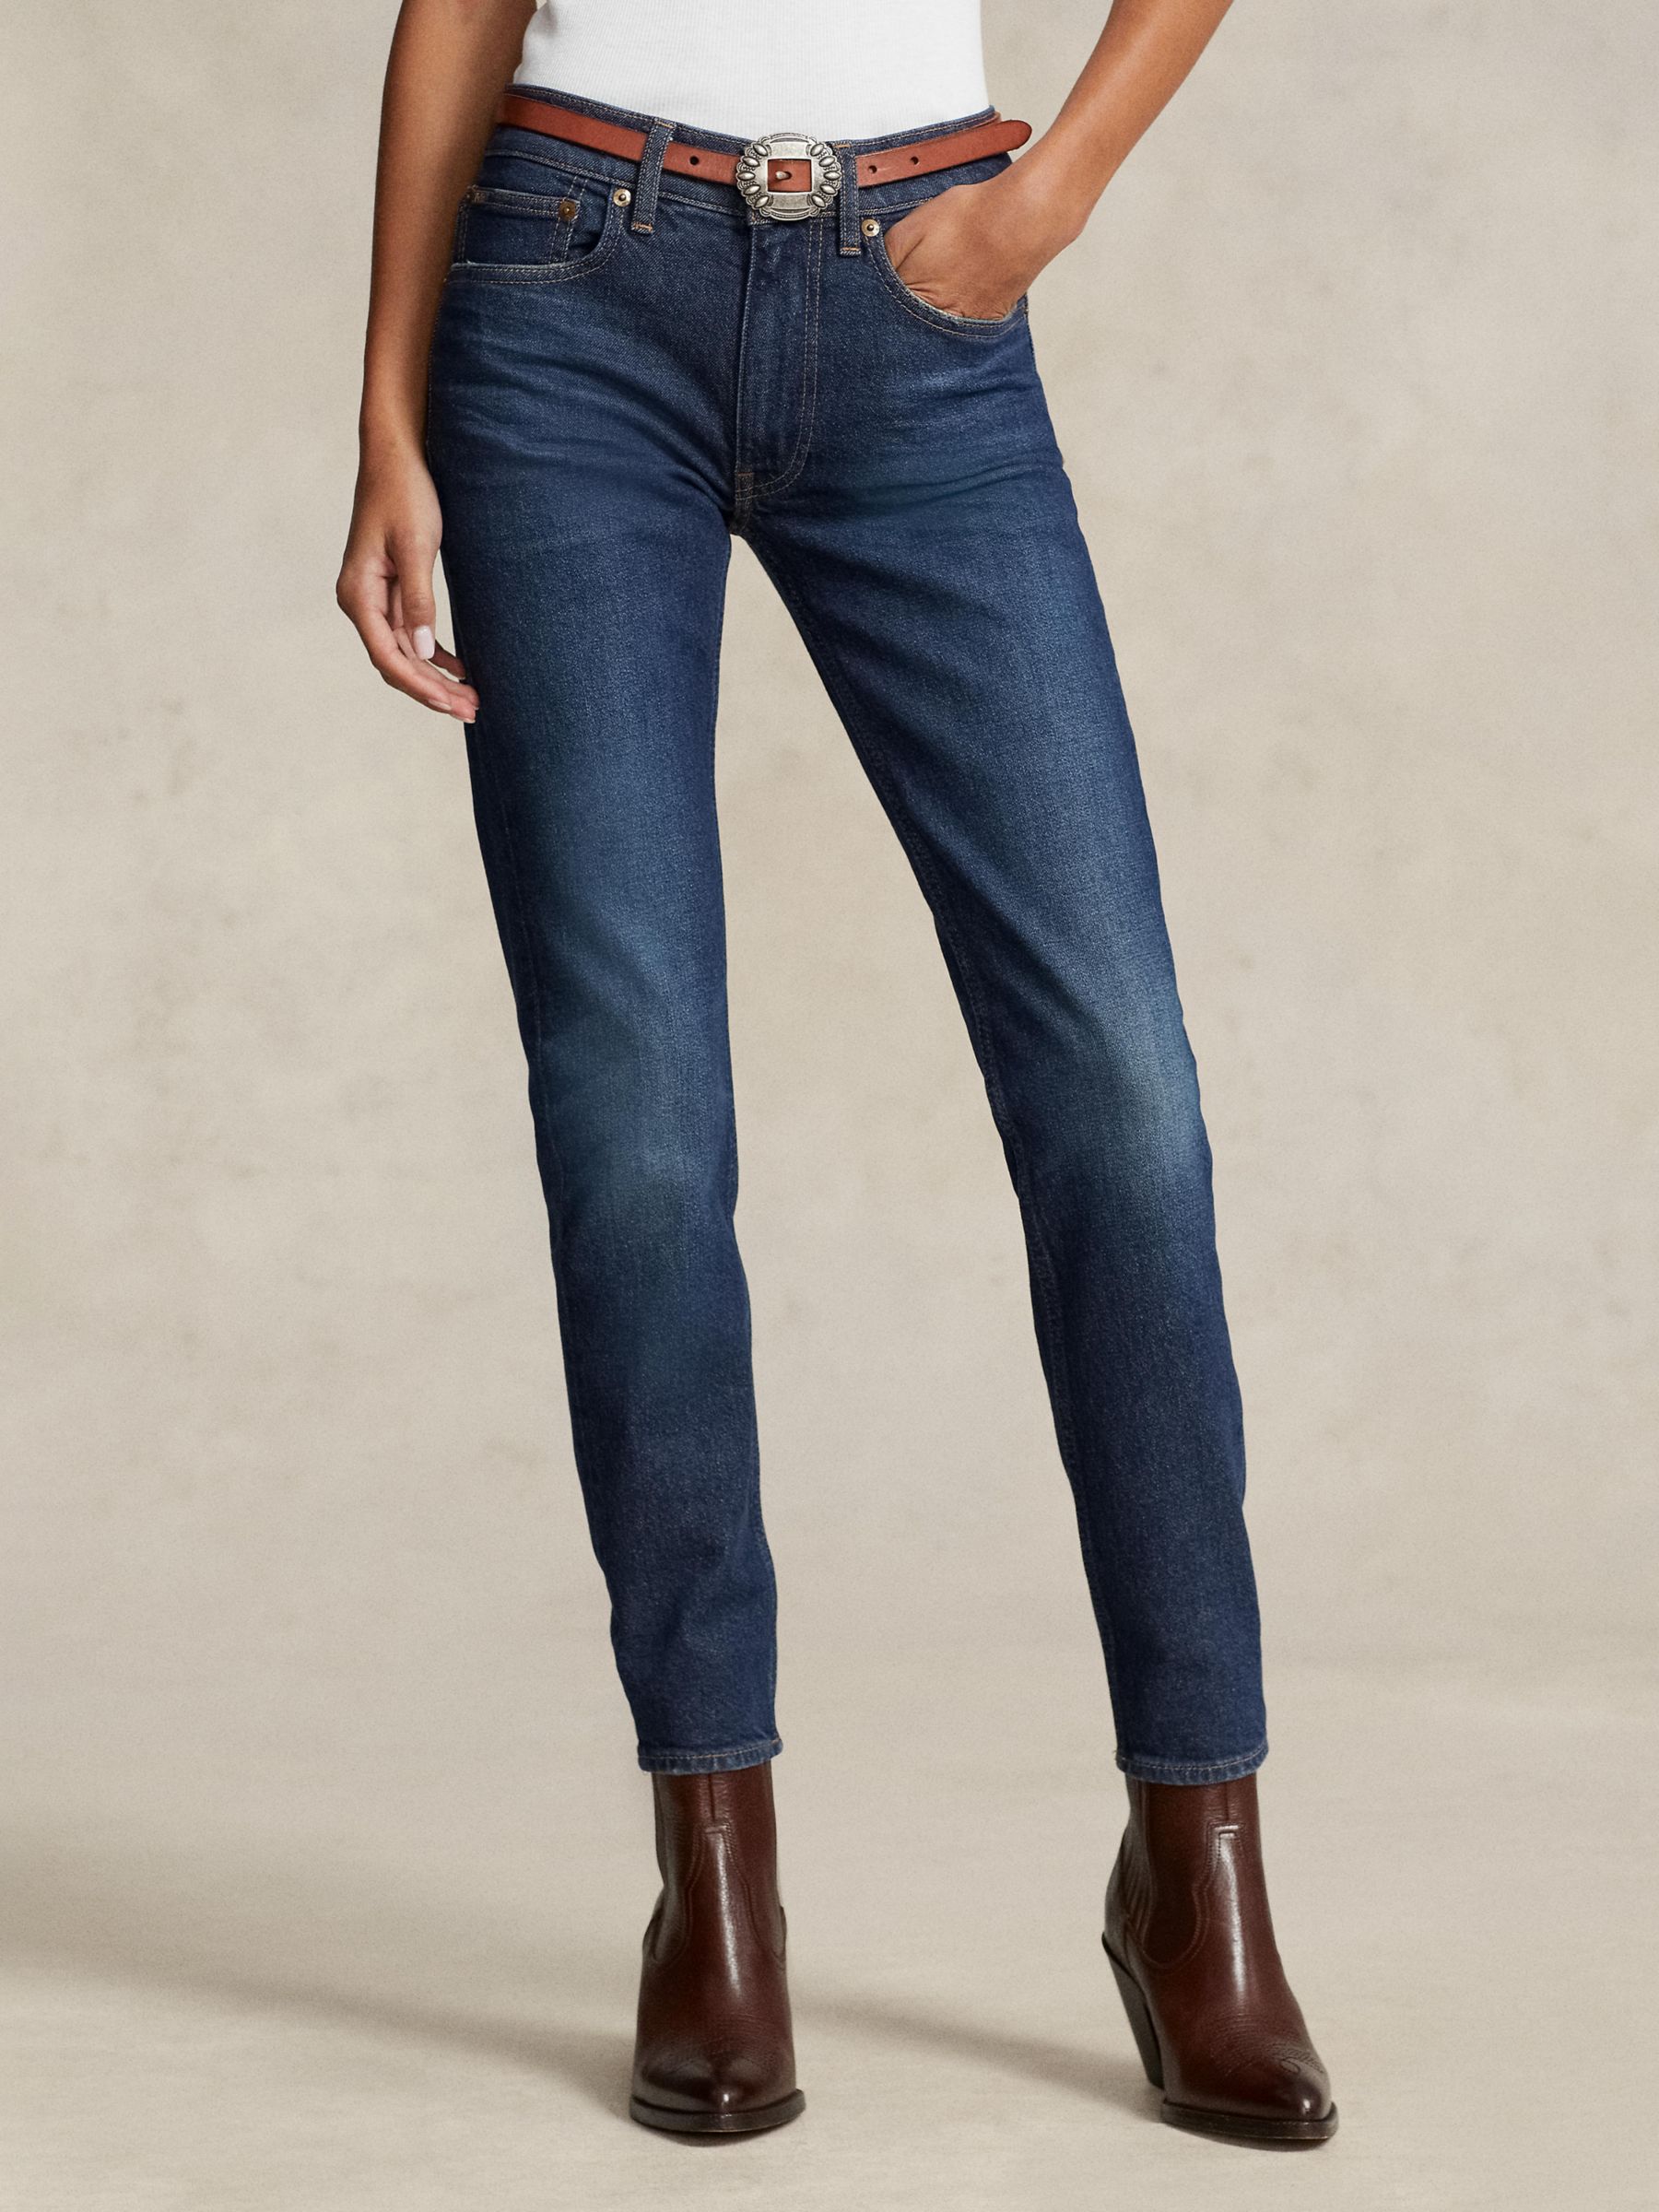 Polo Ralph Lauren Mid Rise Skinny Jeans, Celebes Wash, 26